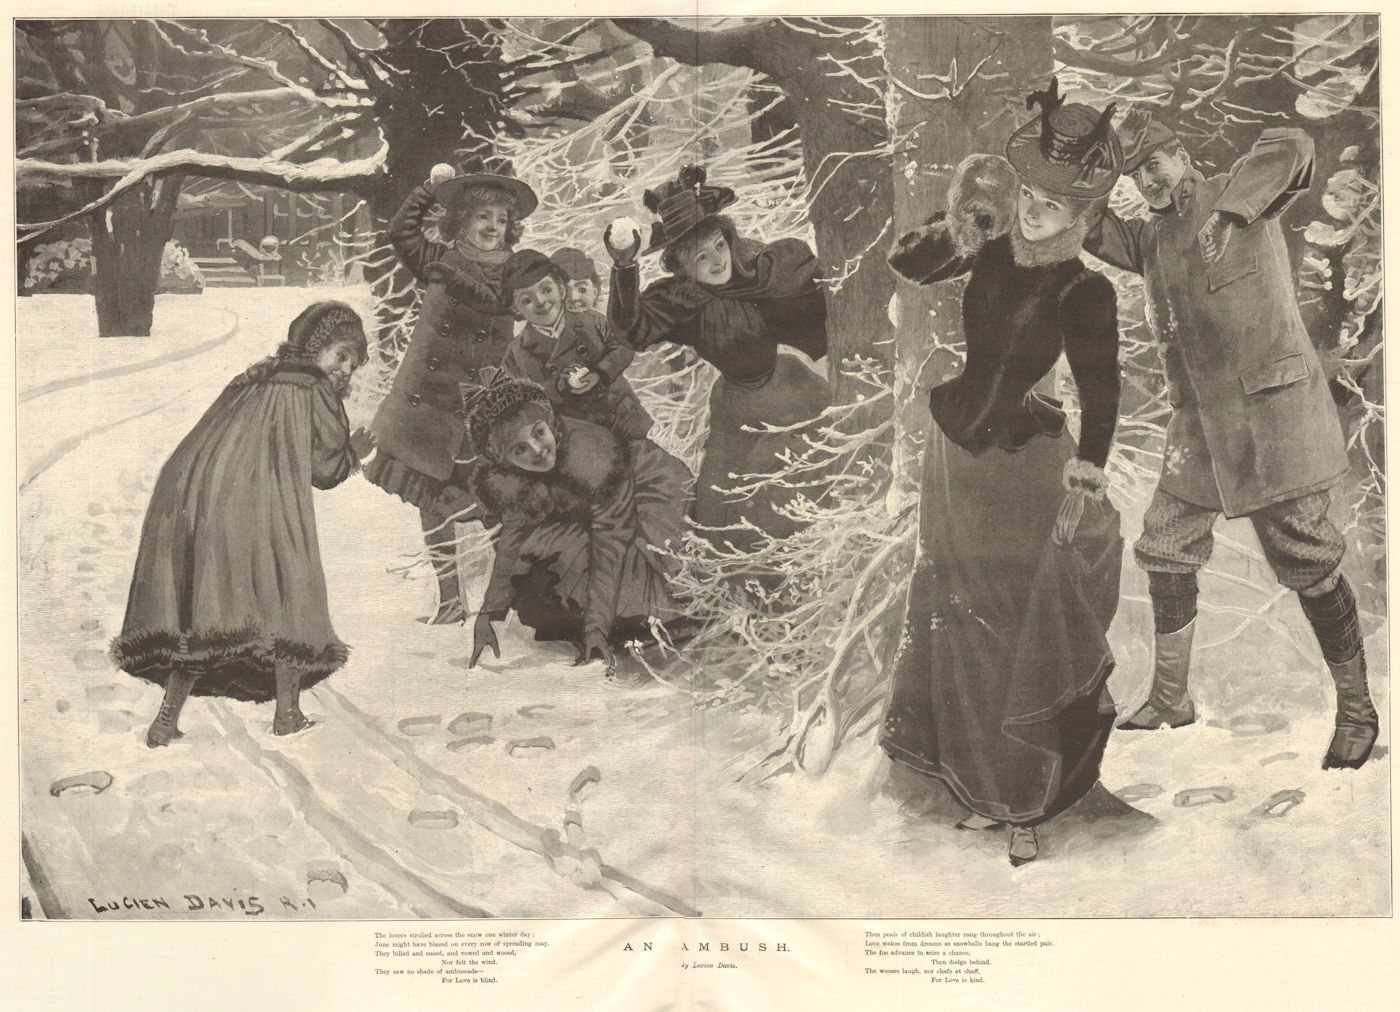 Associate Product An ambush. Winter Sports. Family Snowball fight 1897 old antique print picture